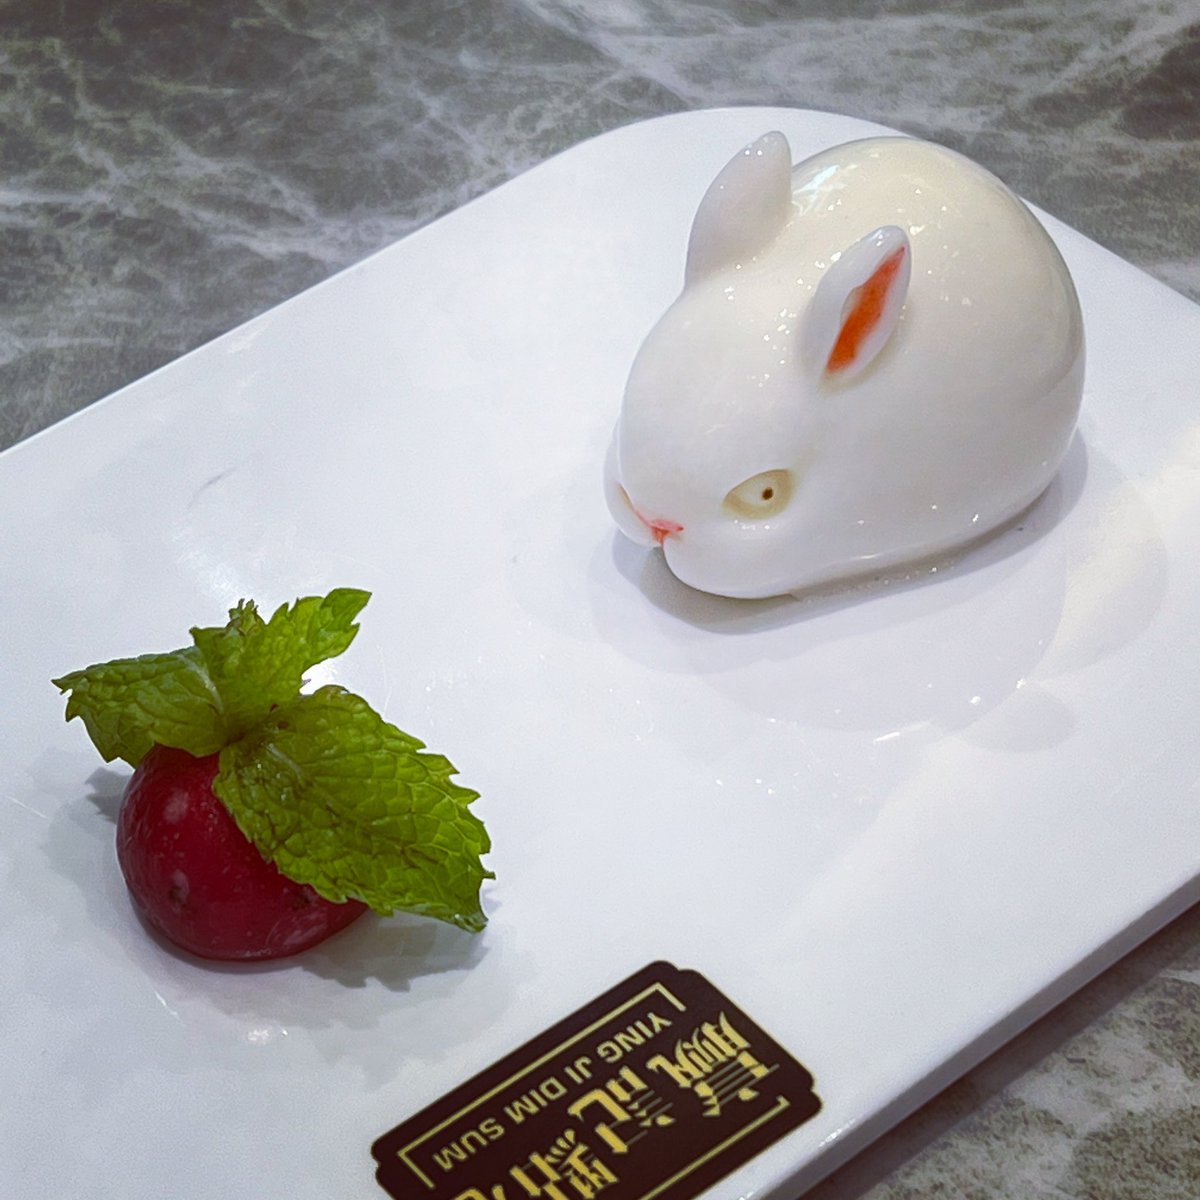 And after the pretend to be carrots…look at this cutie 🐇 😍…made of coconut 🥥 #foodie #entertainment #cleverfood